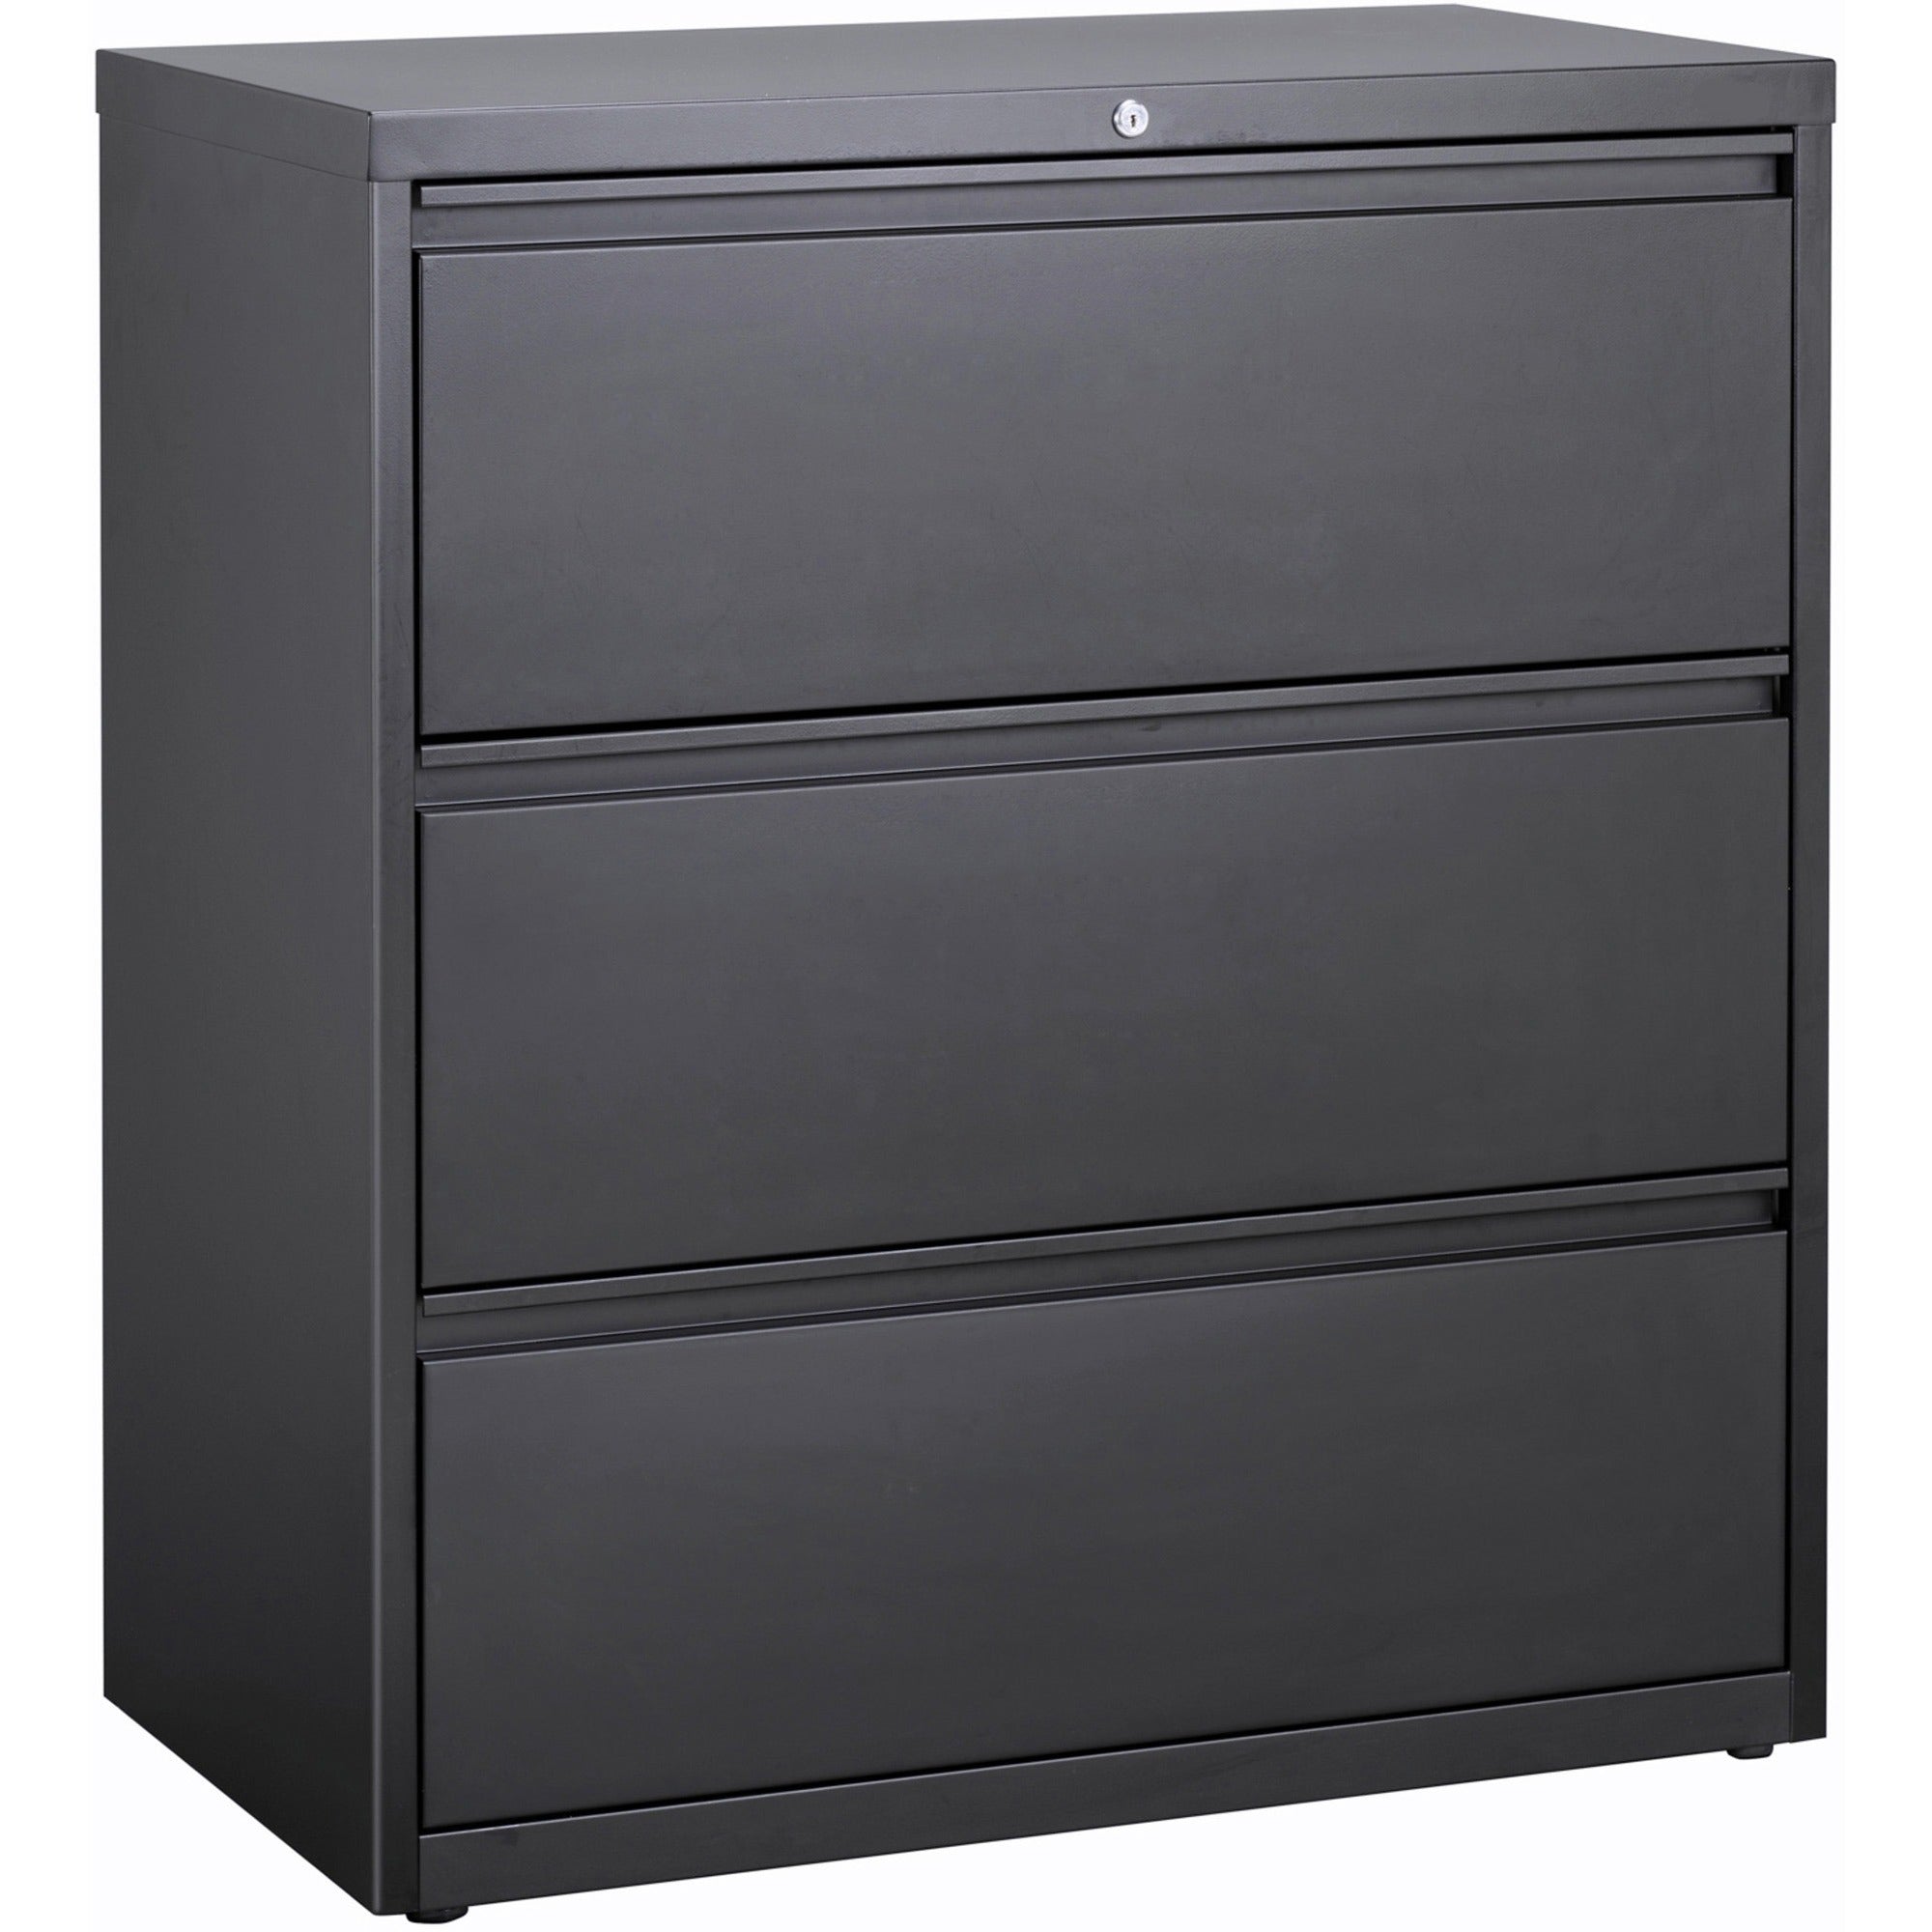 Lorell Fortress Series Lateral File - 36" x 18.8" x 40.1" - 3 x Drawer(s) for File - A4, Legal, Letter - Lateral - Anti-tip, Security Lock, Ball Bearing Slide, Reinforced Base, Leveling Glide, Interlocking, Hanging Rail, Magnetic Label Holder - Charc - 